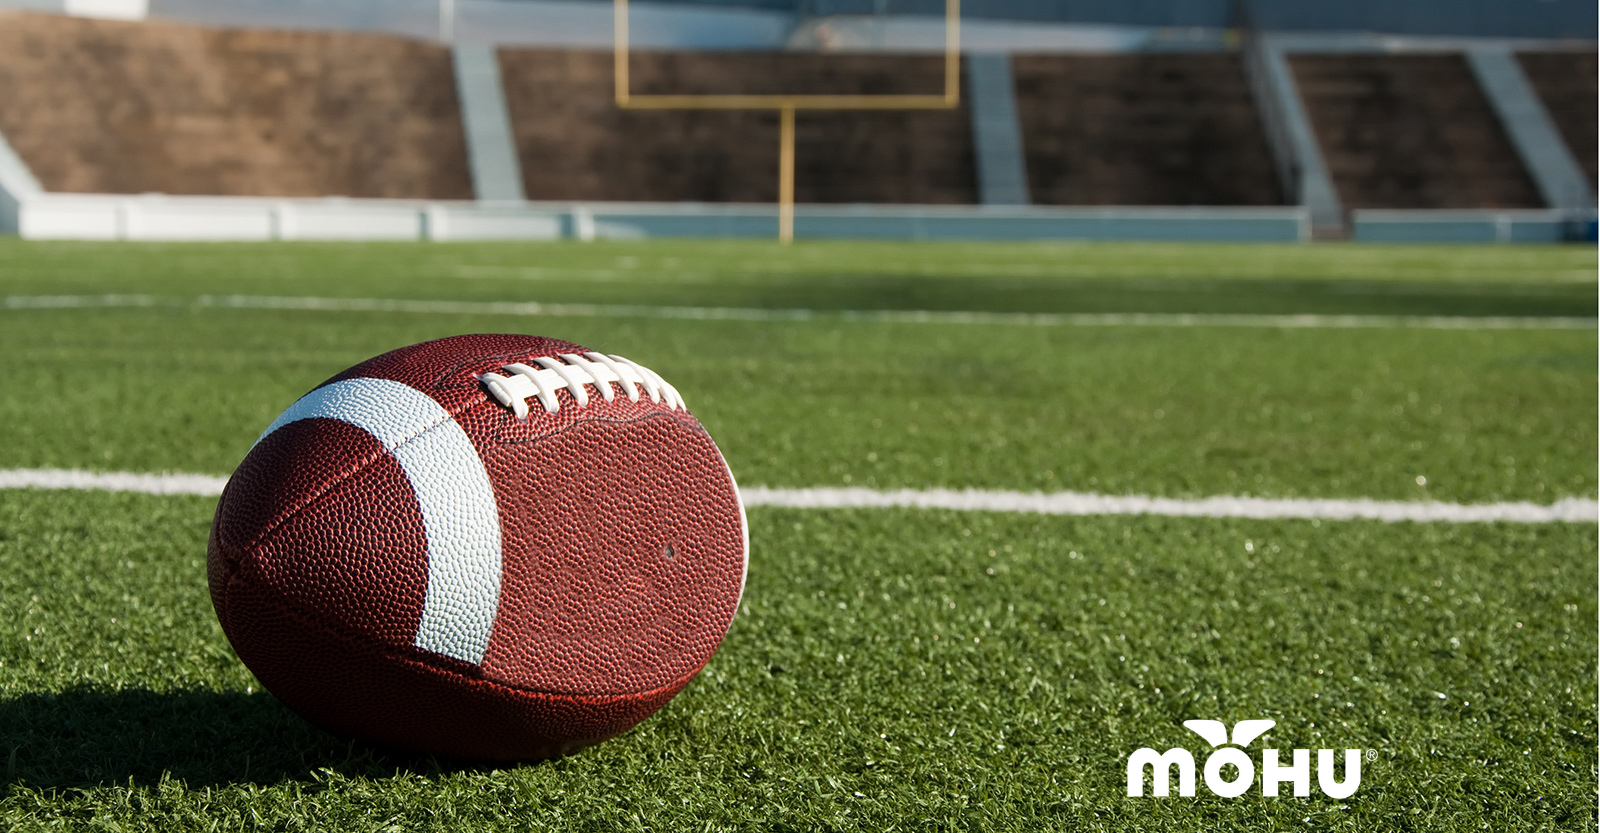 football resting on football field with stadium in background and mohu logo